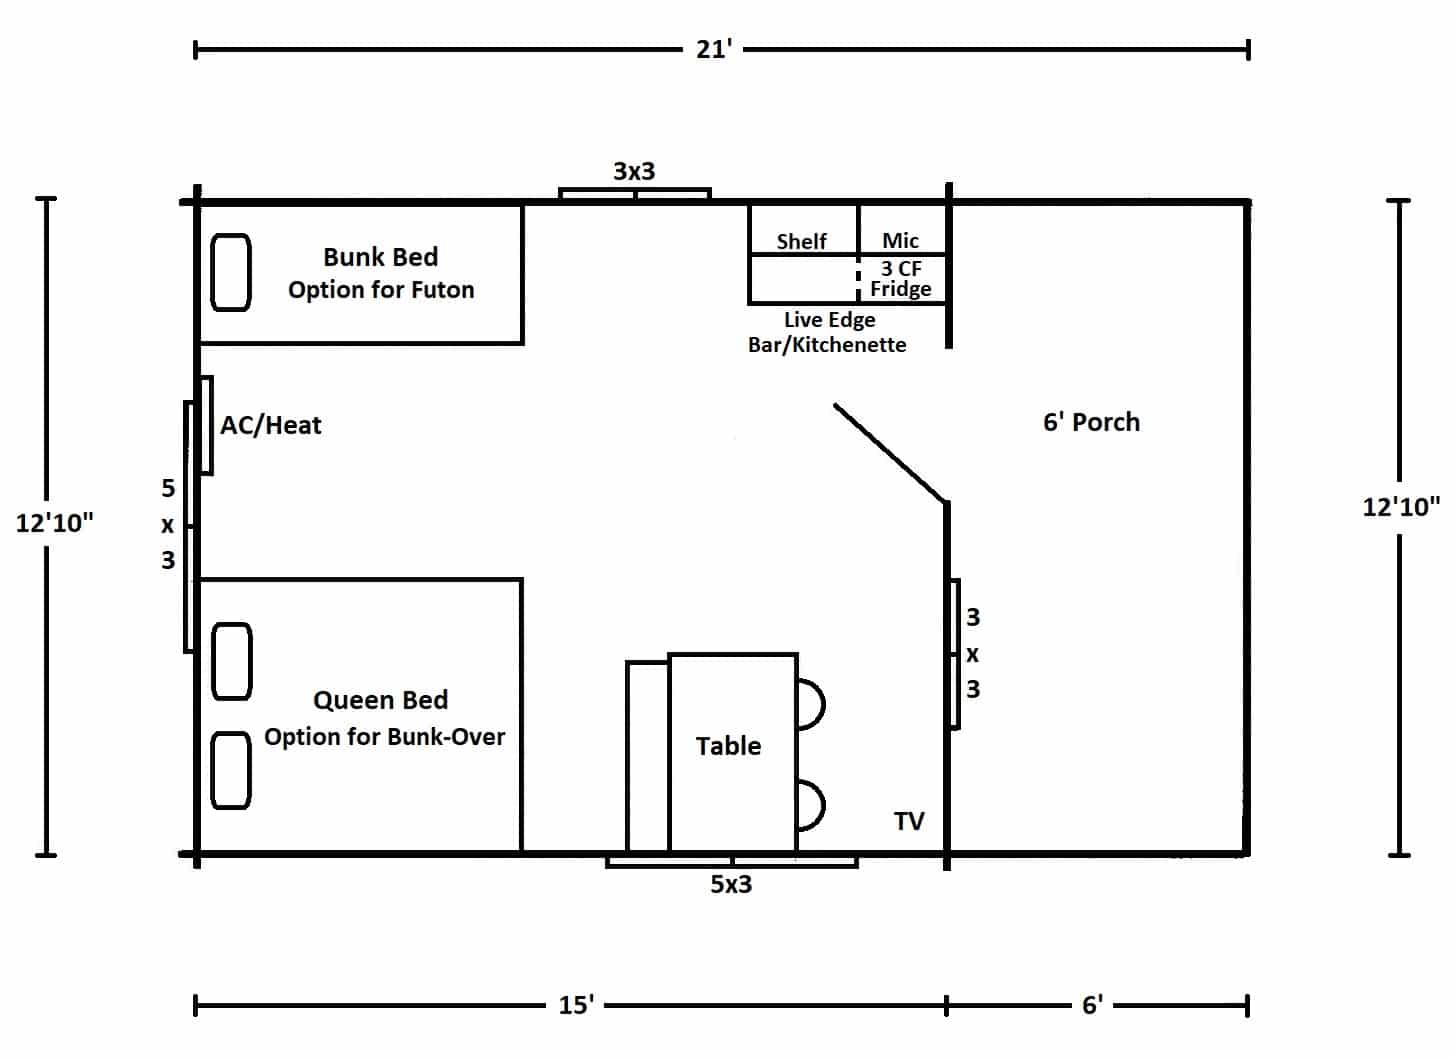 One Roomer layout